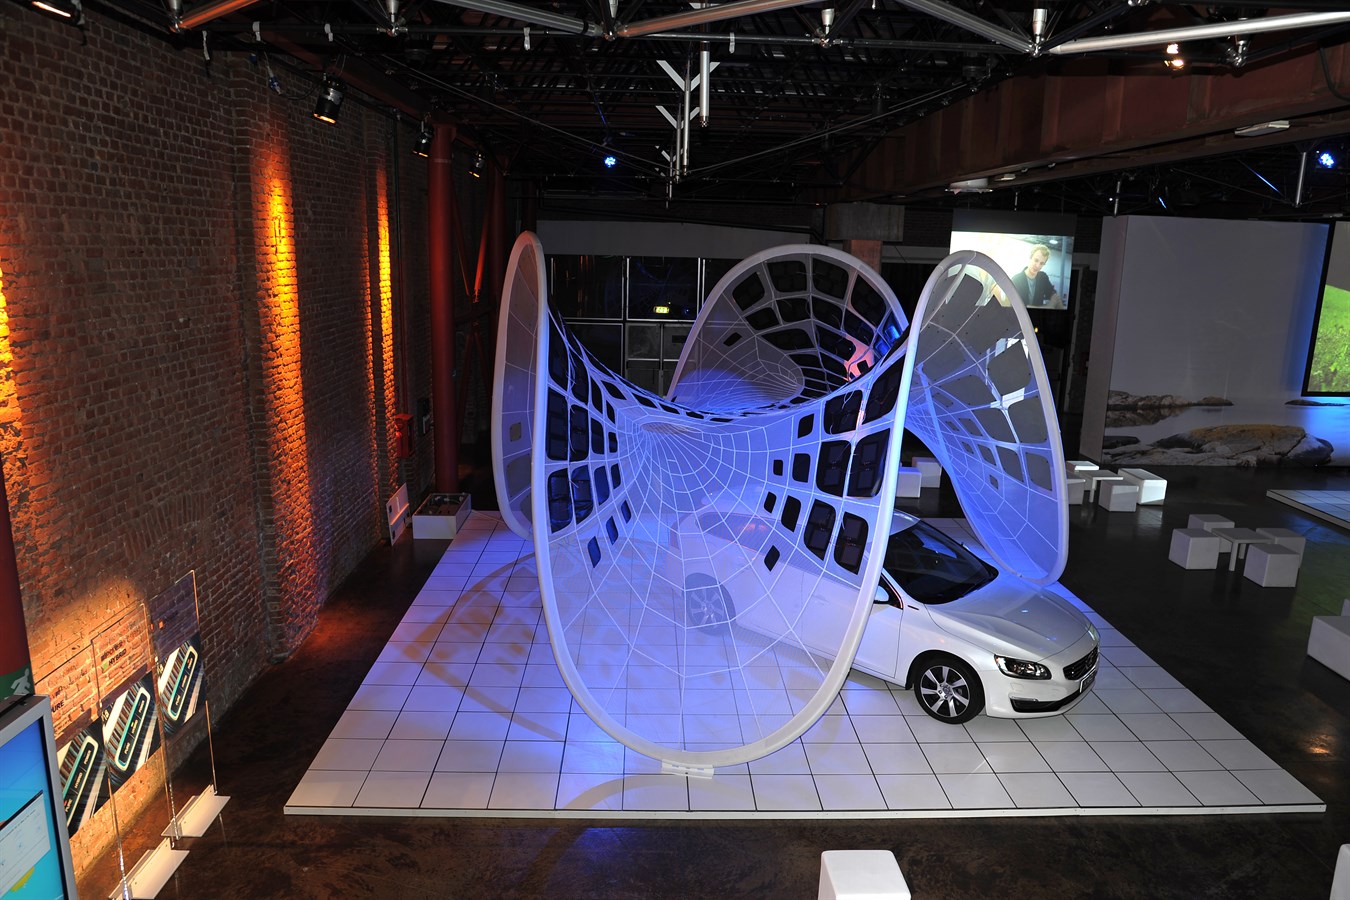 Volvo Cars launches the Pure Tension pavilion in Milan, Italy